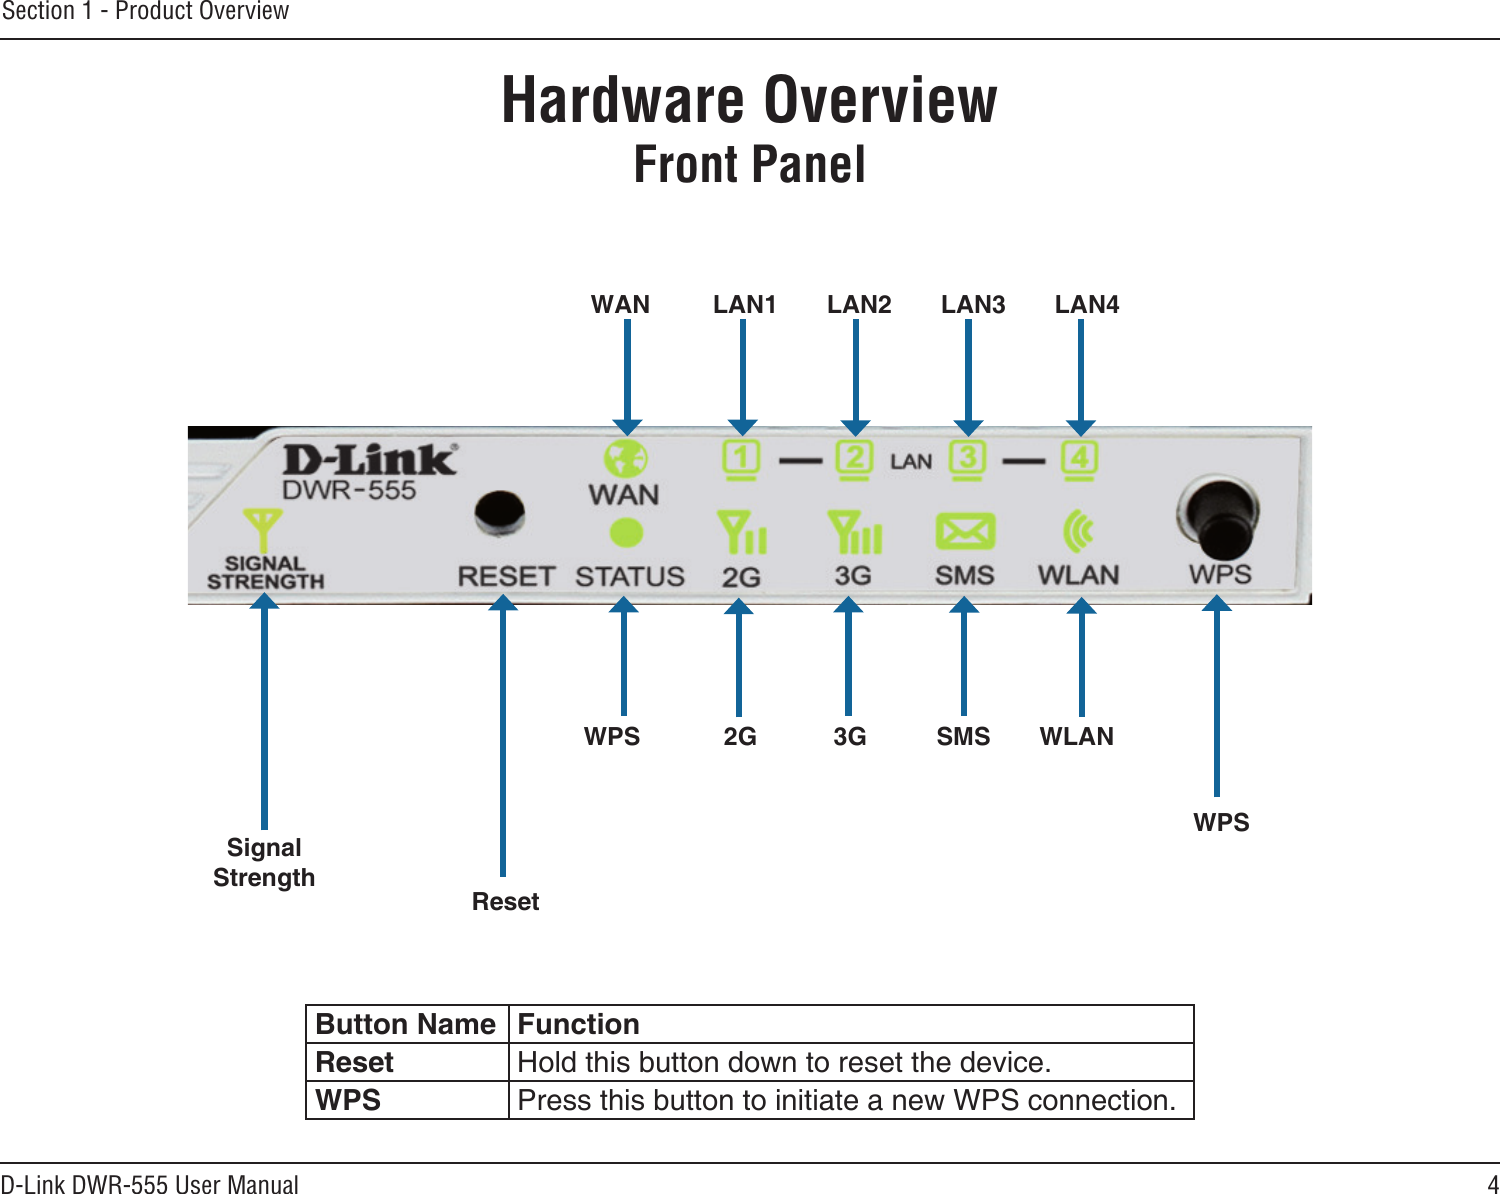 4D-Link DWR-555 User ManualSection 1 - Product OverviewHardware OverviewFront PanelWPS            2G           3G          SMS       WLAN WAN         LAN1       LAN2       LAN3       LAN4SignalStrengthReset  WPSButton Name FunctionReset Hold this button down to reset the device.WPS Press this button to initiate a new WPS connection.